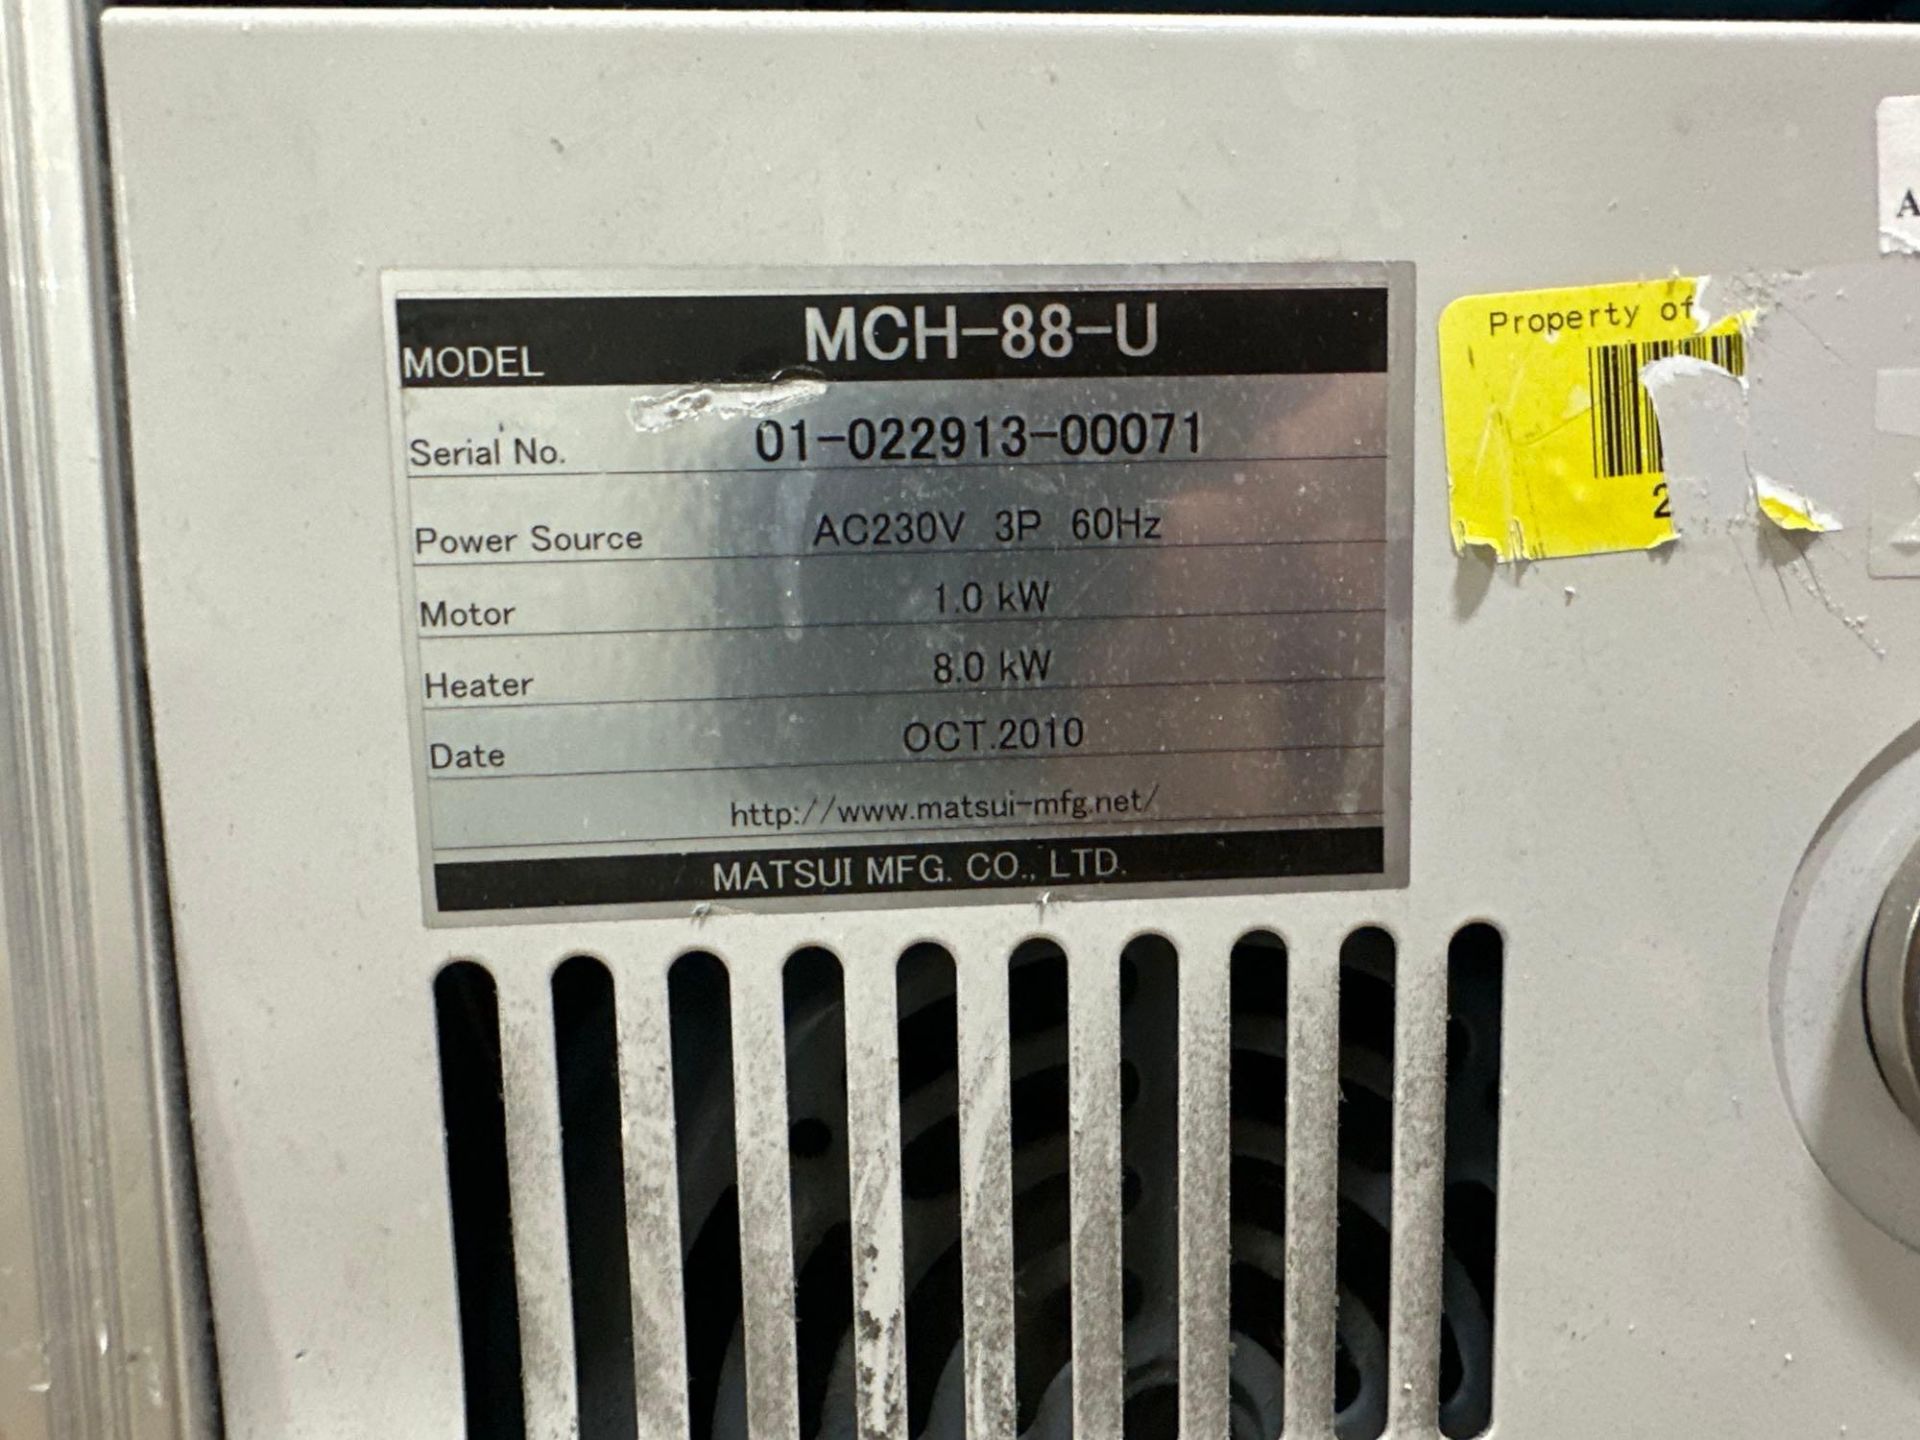 Matsui MCH-88-U Thermolator, 24gpm, 57psi, 248F,ÊEquipped With:Ê Alarm Lamp and Buzzer - Image 5 of 5